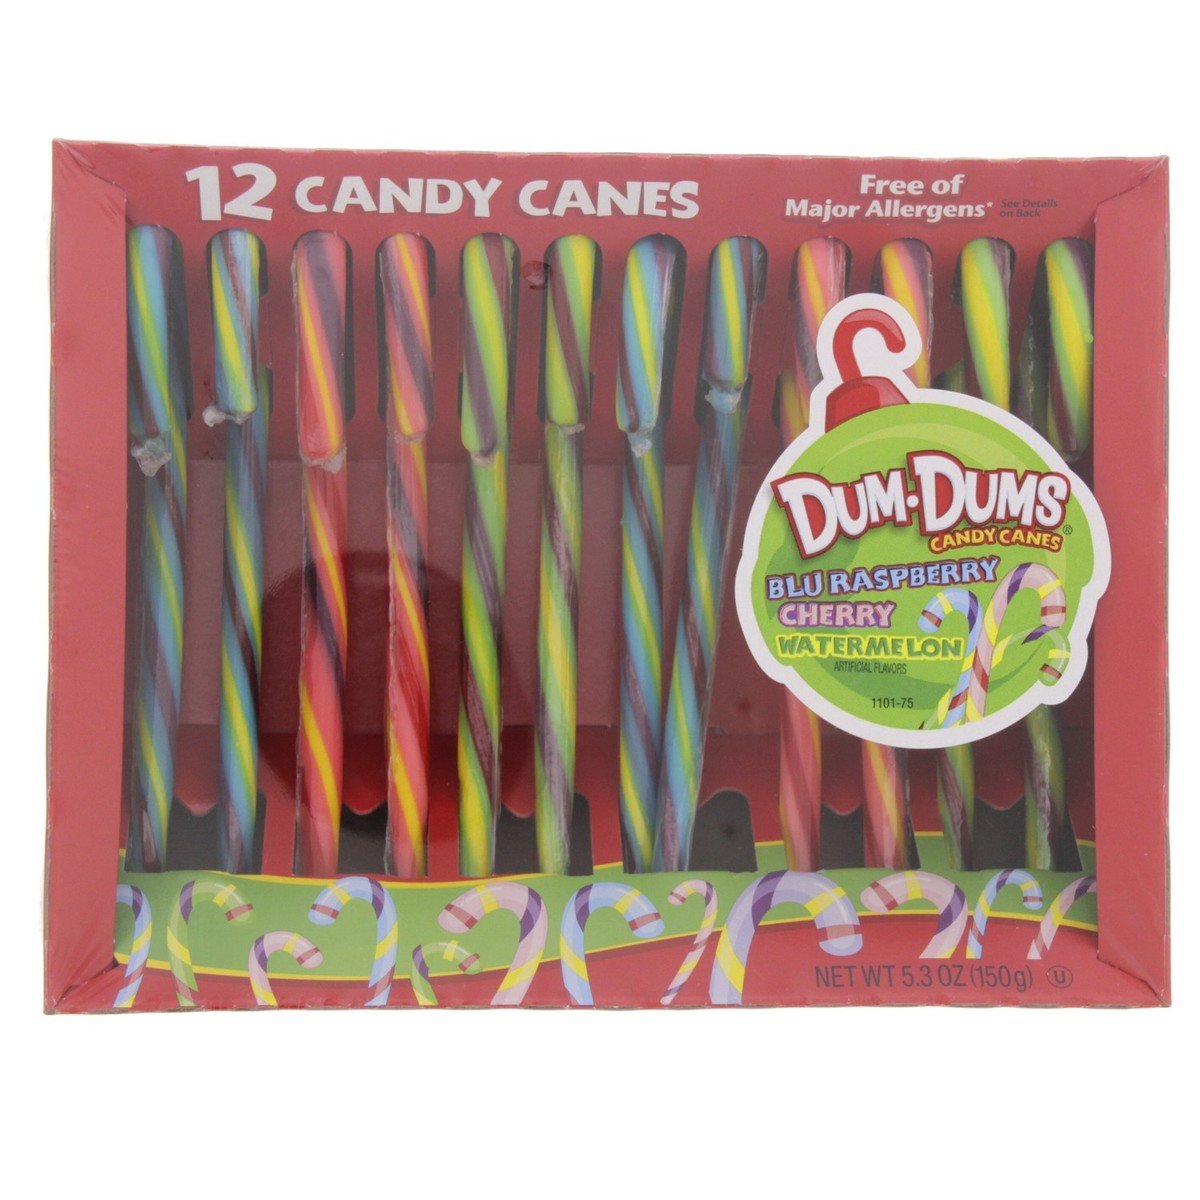 Spangler Candy Canes Raspberry, Cherry and Watermelon, 150 g